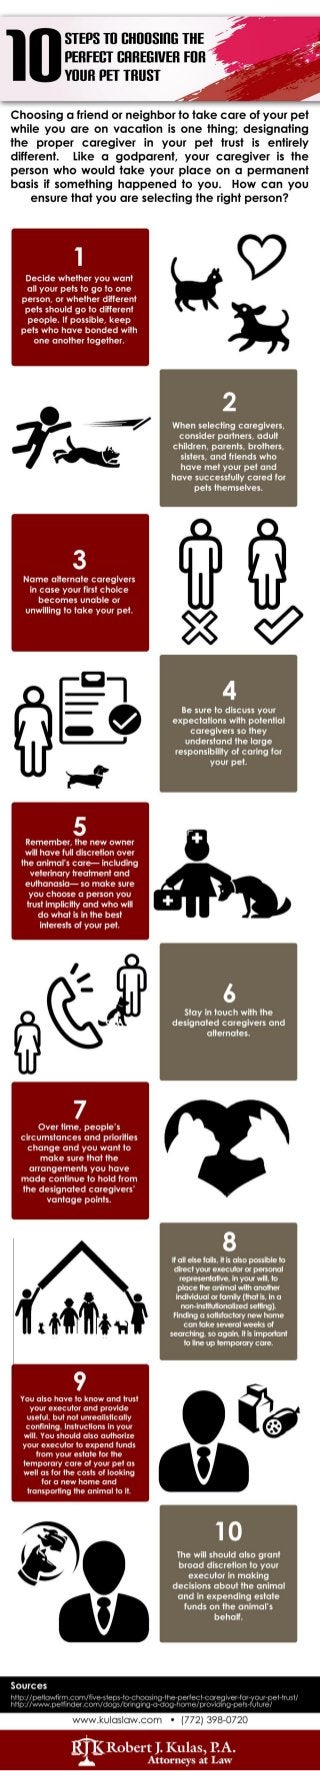 Ten Steps to Choosing the Perfect Caregiver For Your Pet Trust